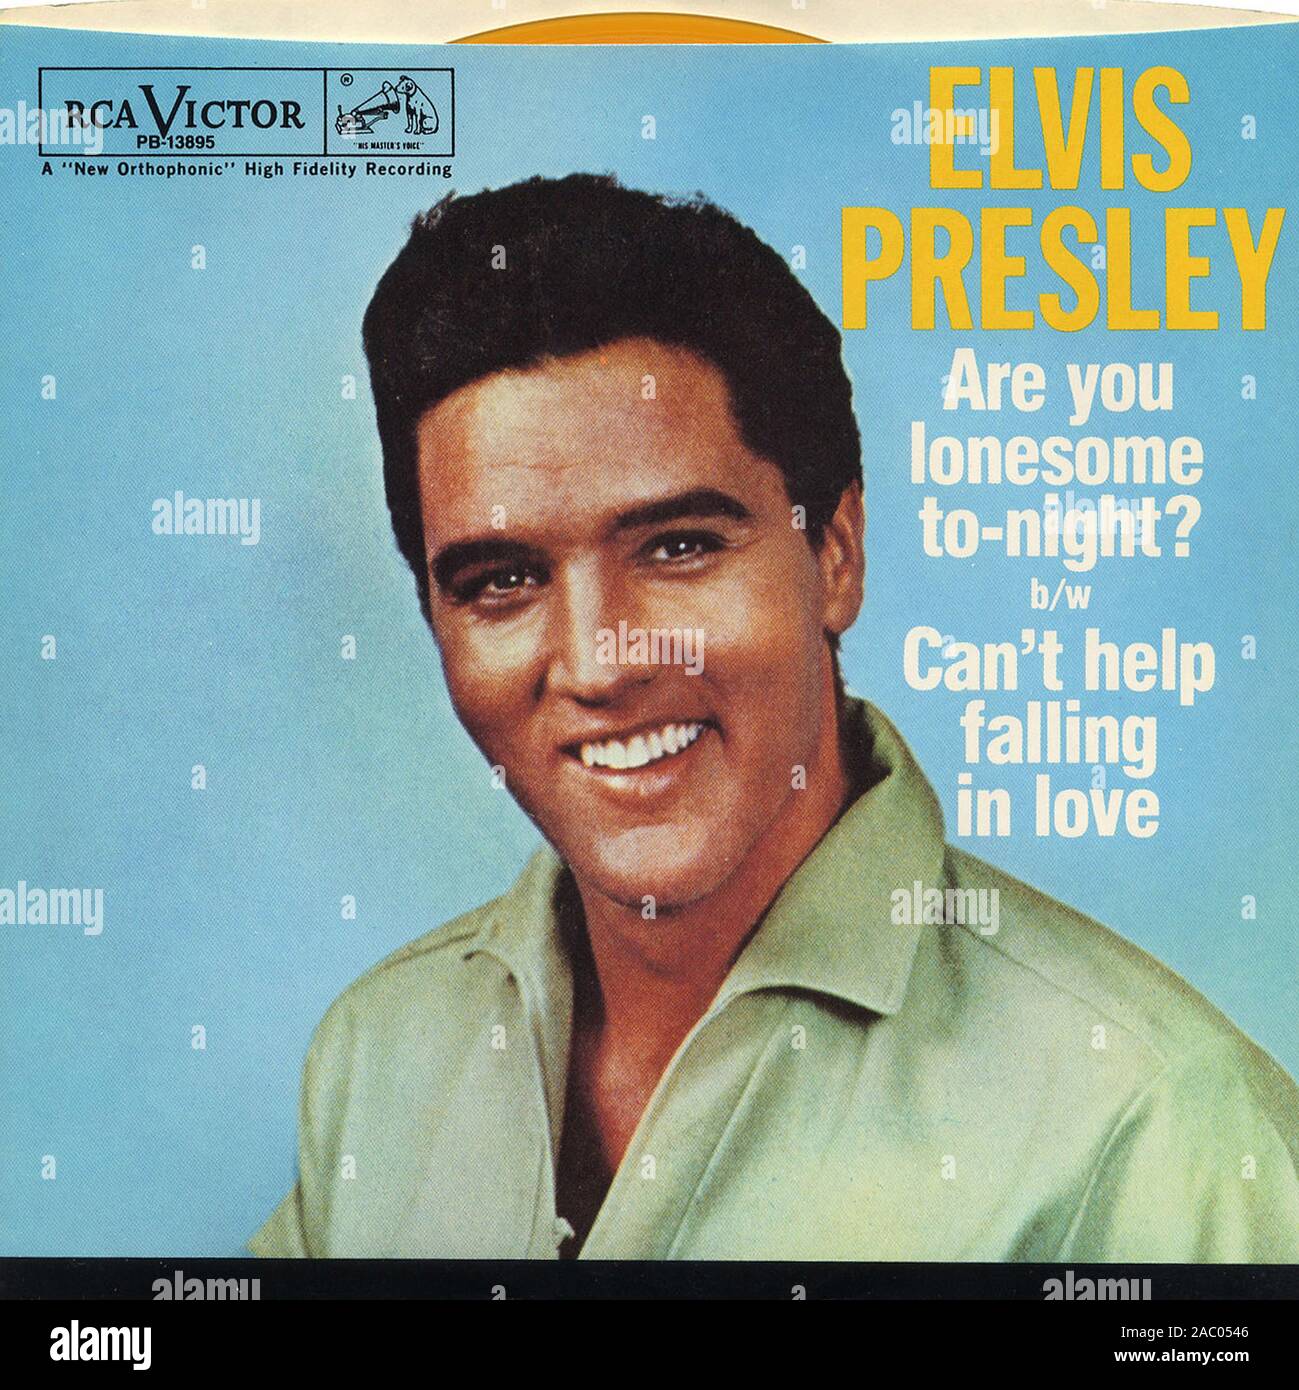 Elvis Presley Are You Lonesome Tonight B W Cant Help Falling In Love Vintage Vinyl Album